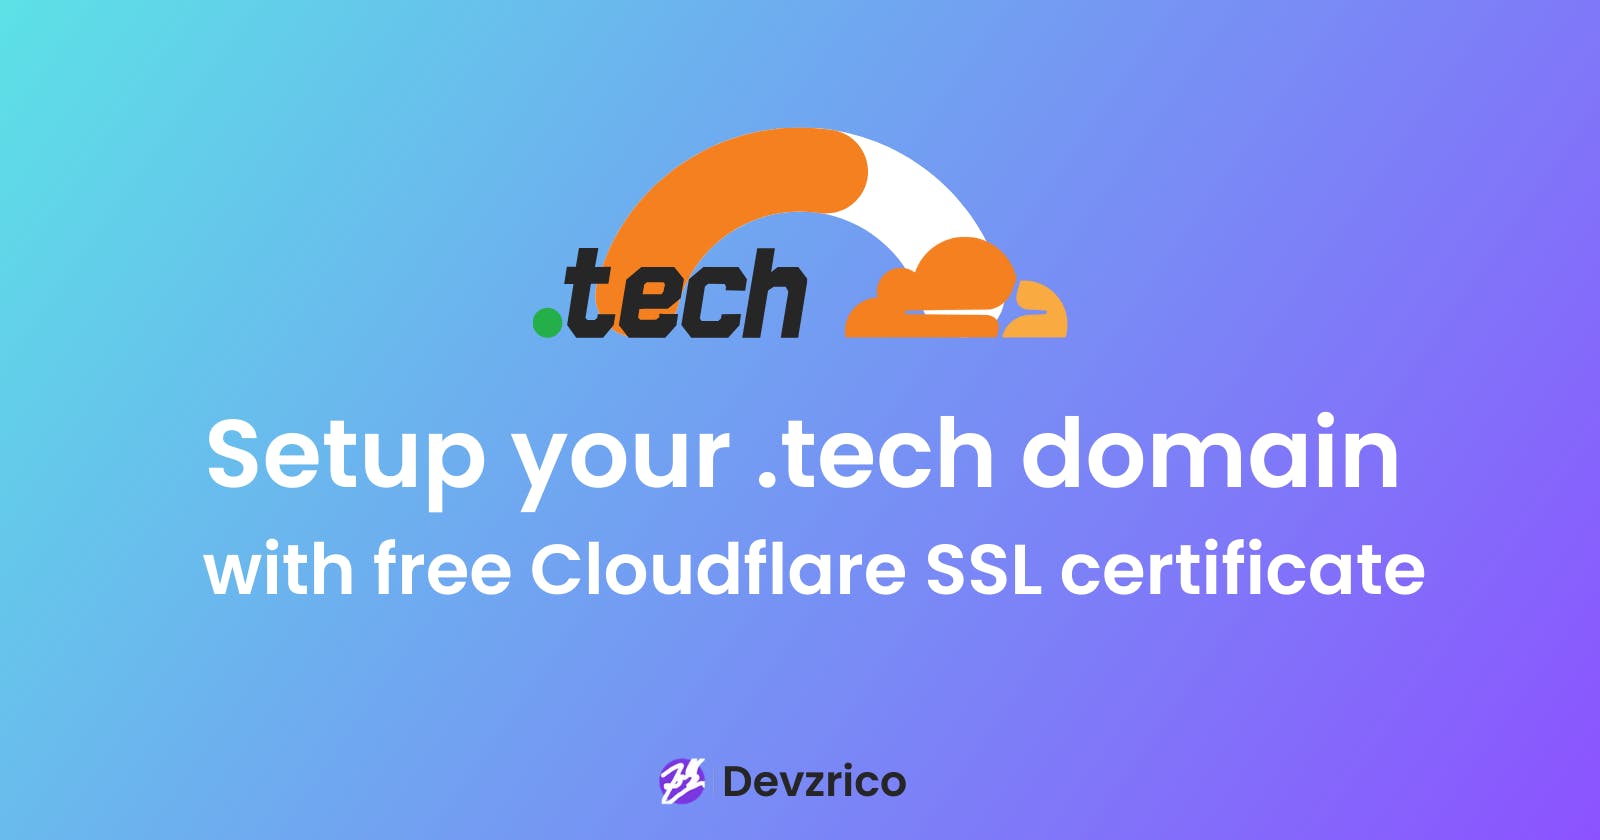 How to set up a .tech domain for GitHub pages with a free Cloudflare SSL certificate